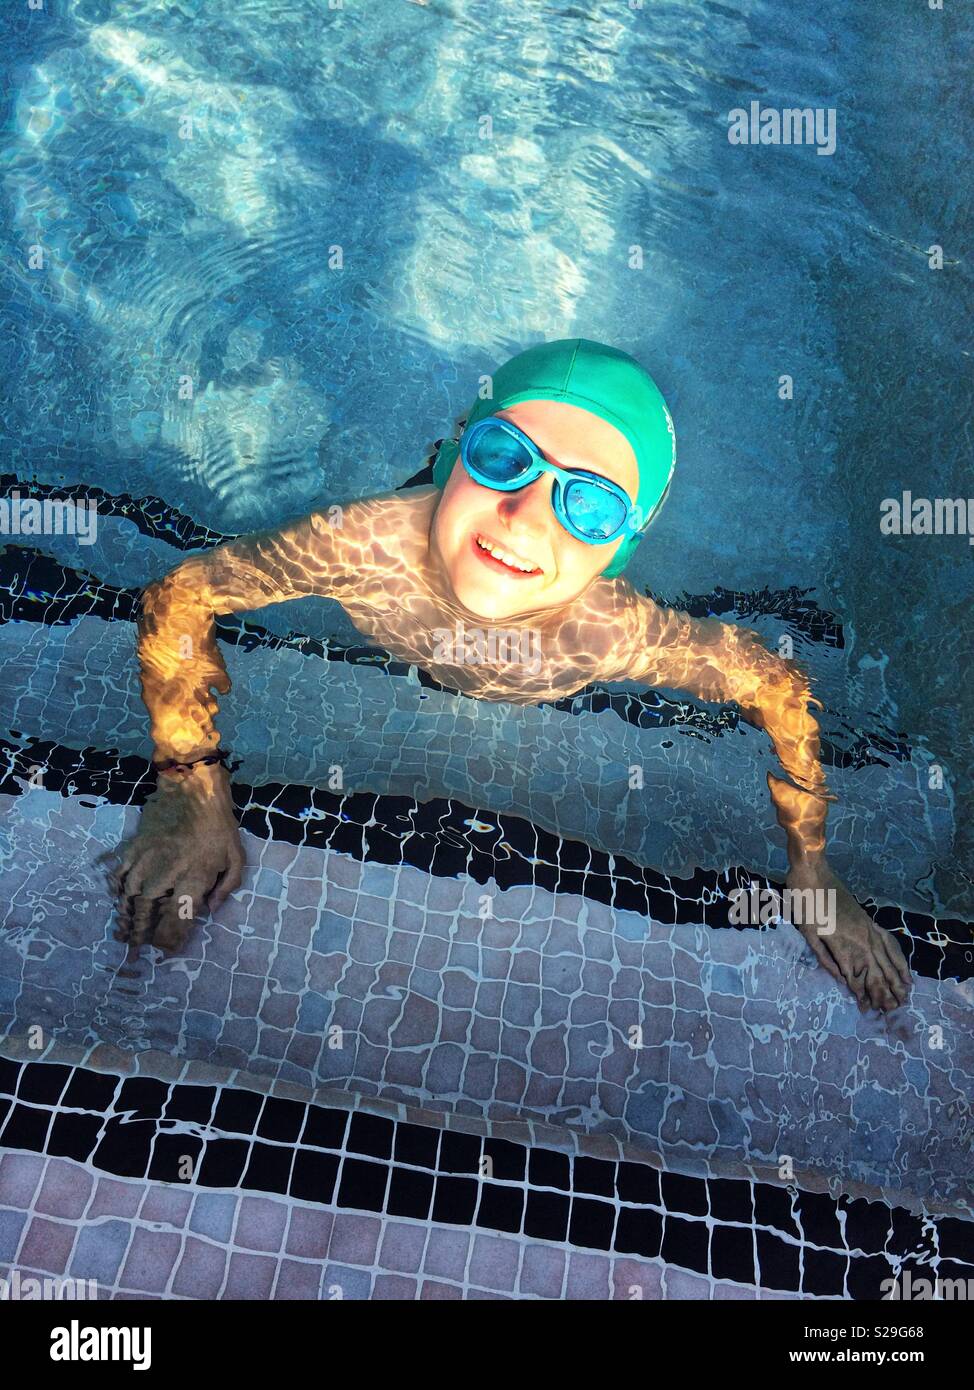 Smiling boy in a swimming pool Stock Photo